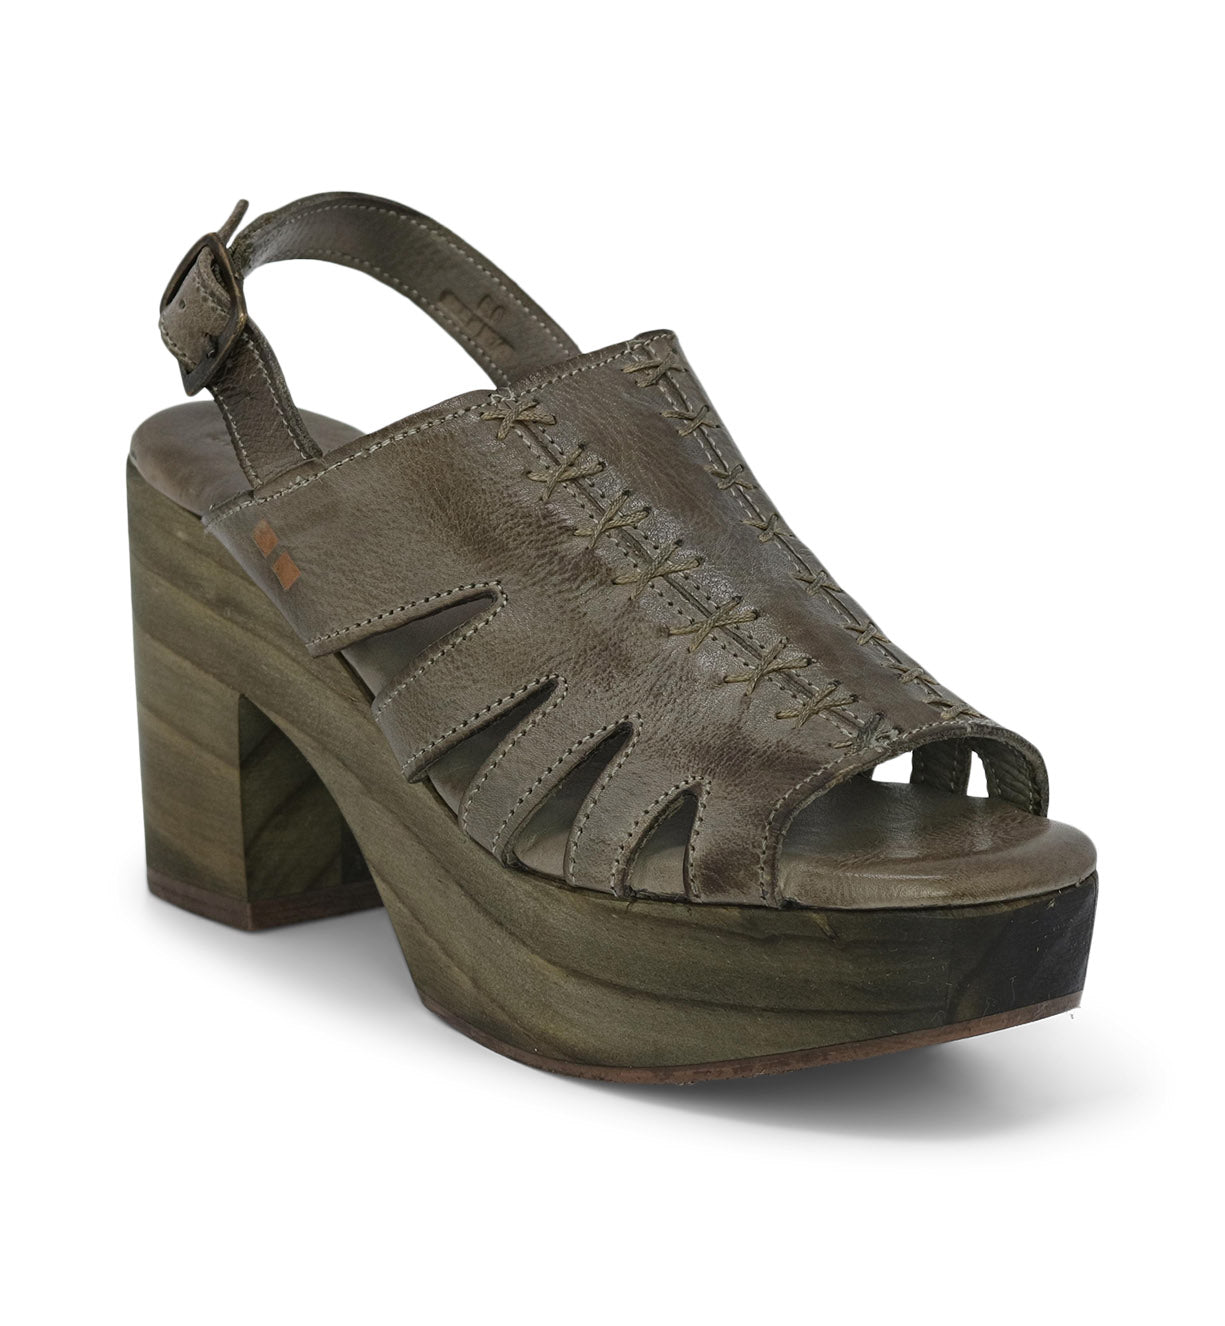 A women's sandal with a wooden platform by Bed Stu.